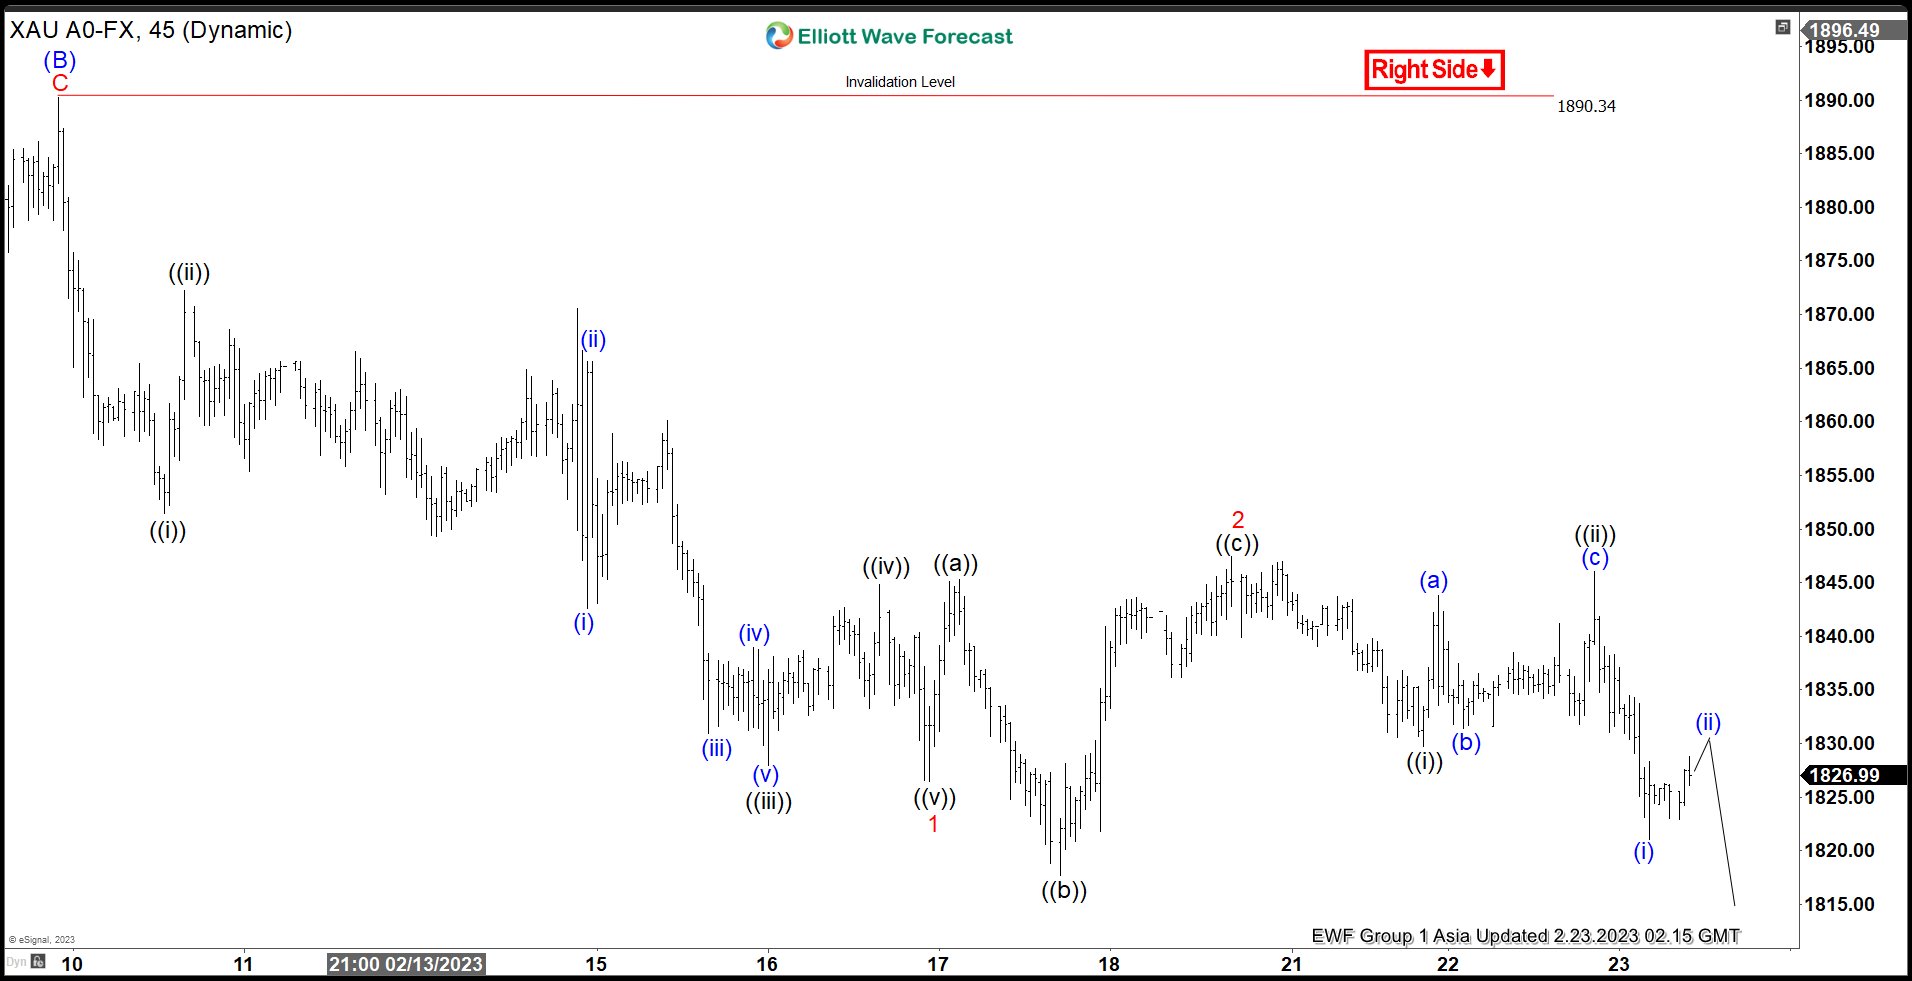 Elliott Wave Suggests Gold (XAUUSD) Still Has Scope to Extend Lower